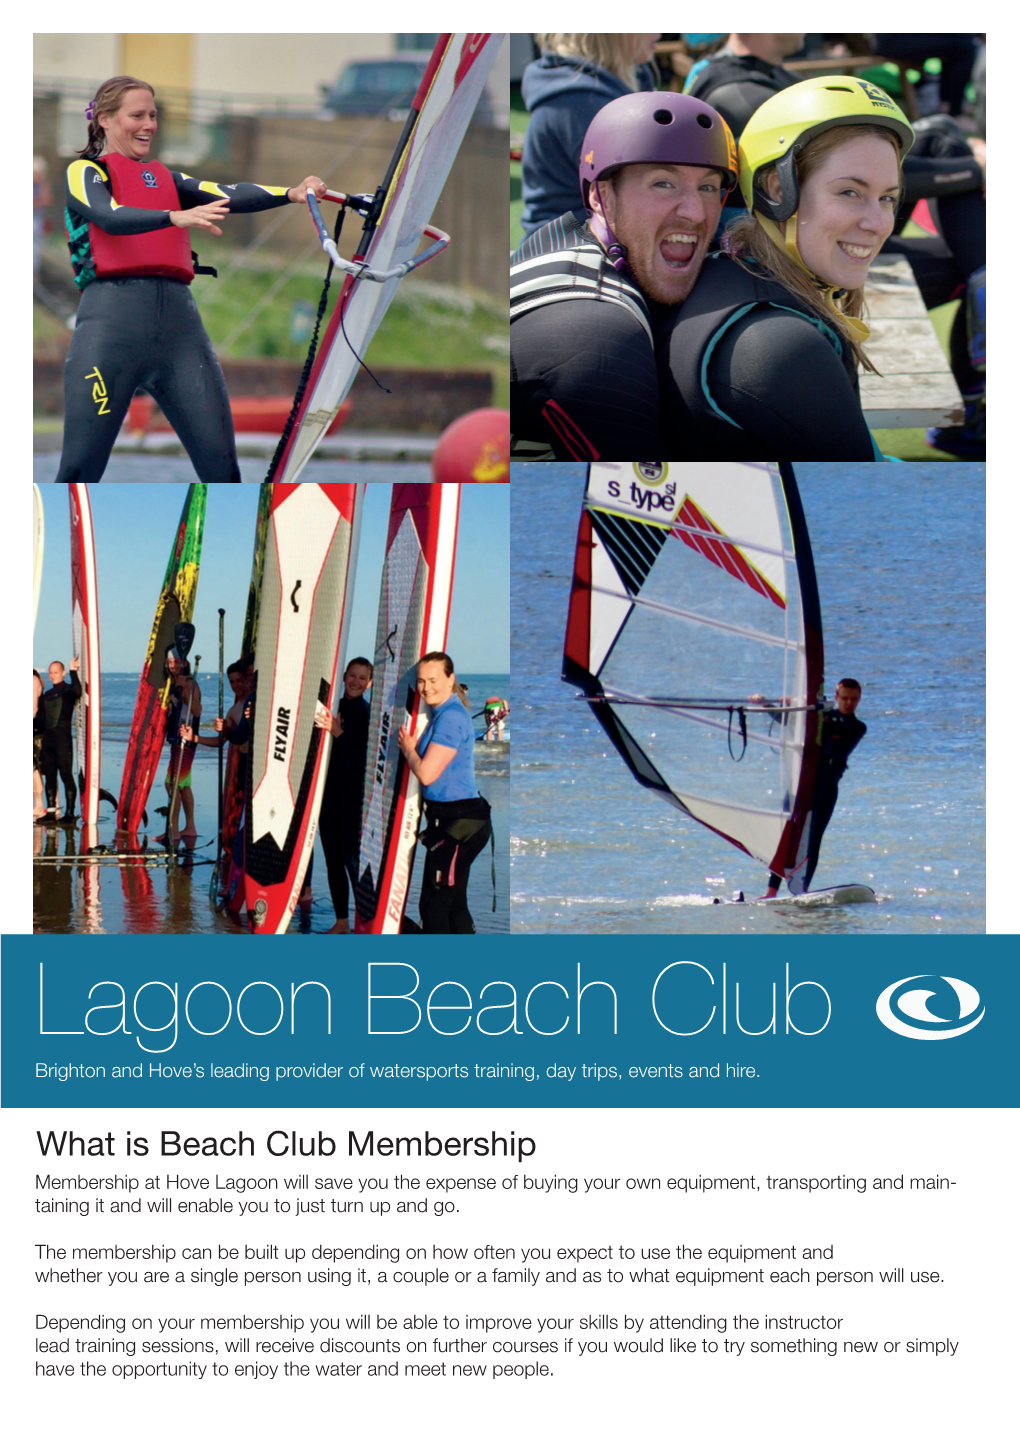 Lagoon Beach Club Brighton and Hove’S Leading Provider of Watersports Training, Day Trips, Events and Hire